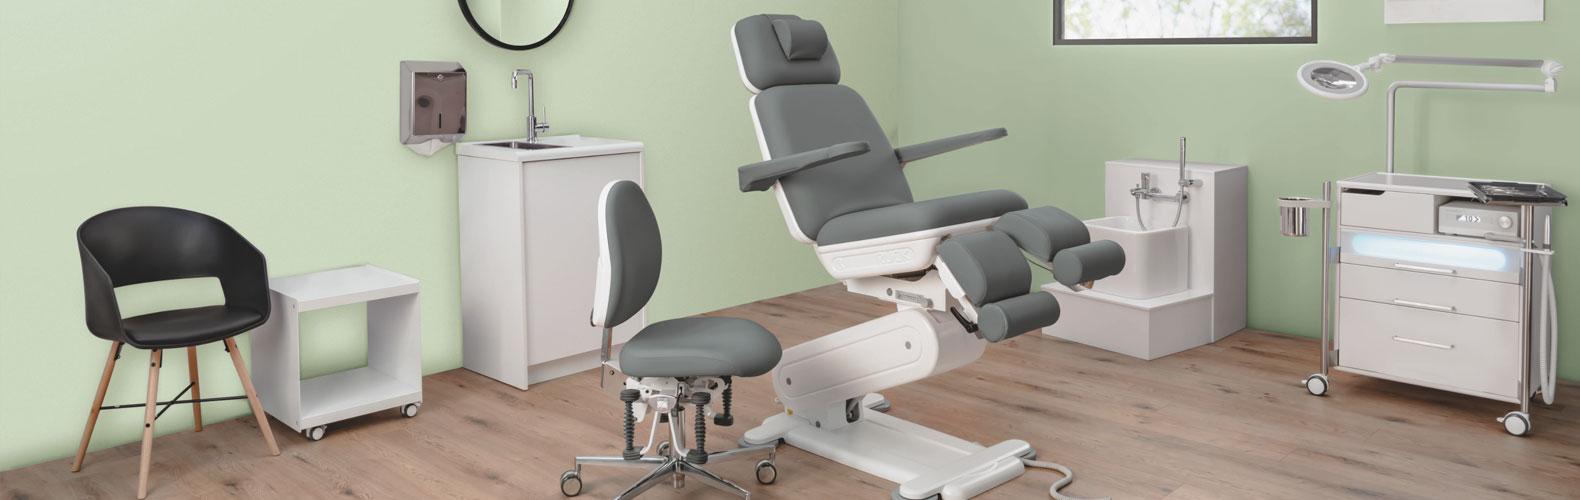 Stella 3 Podiatry Treatment Chair Couch